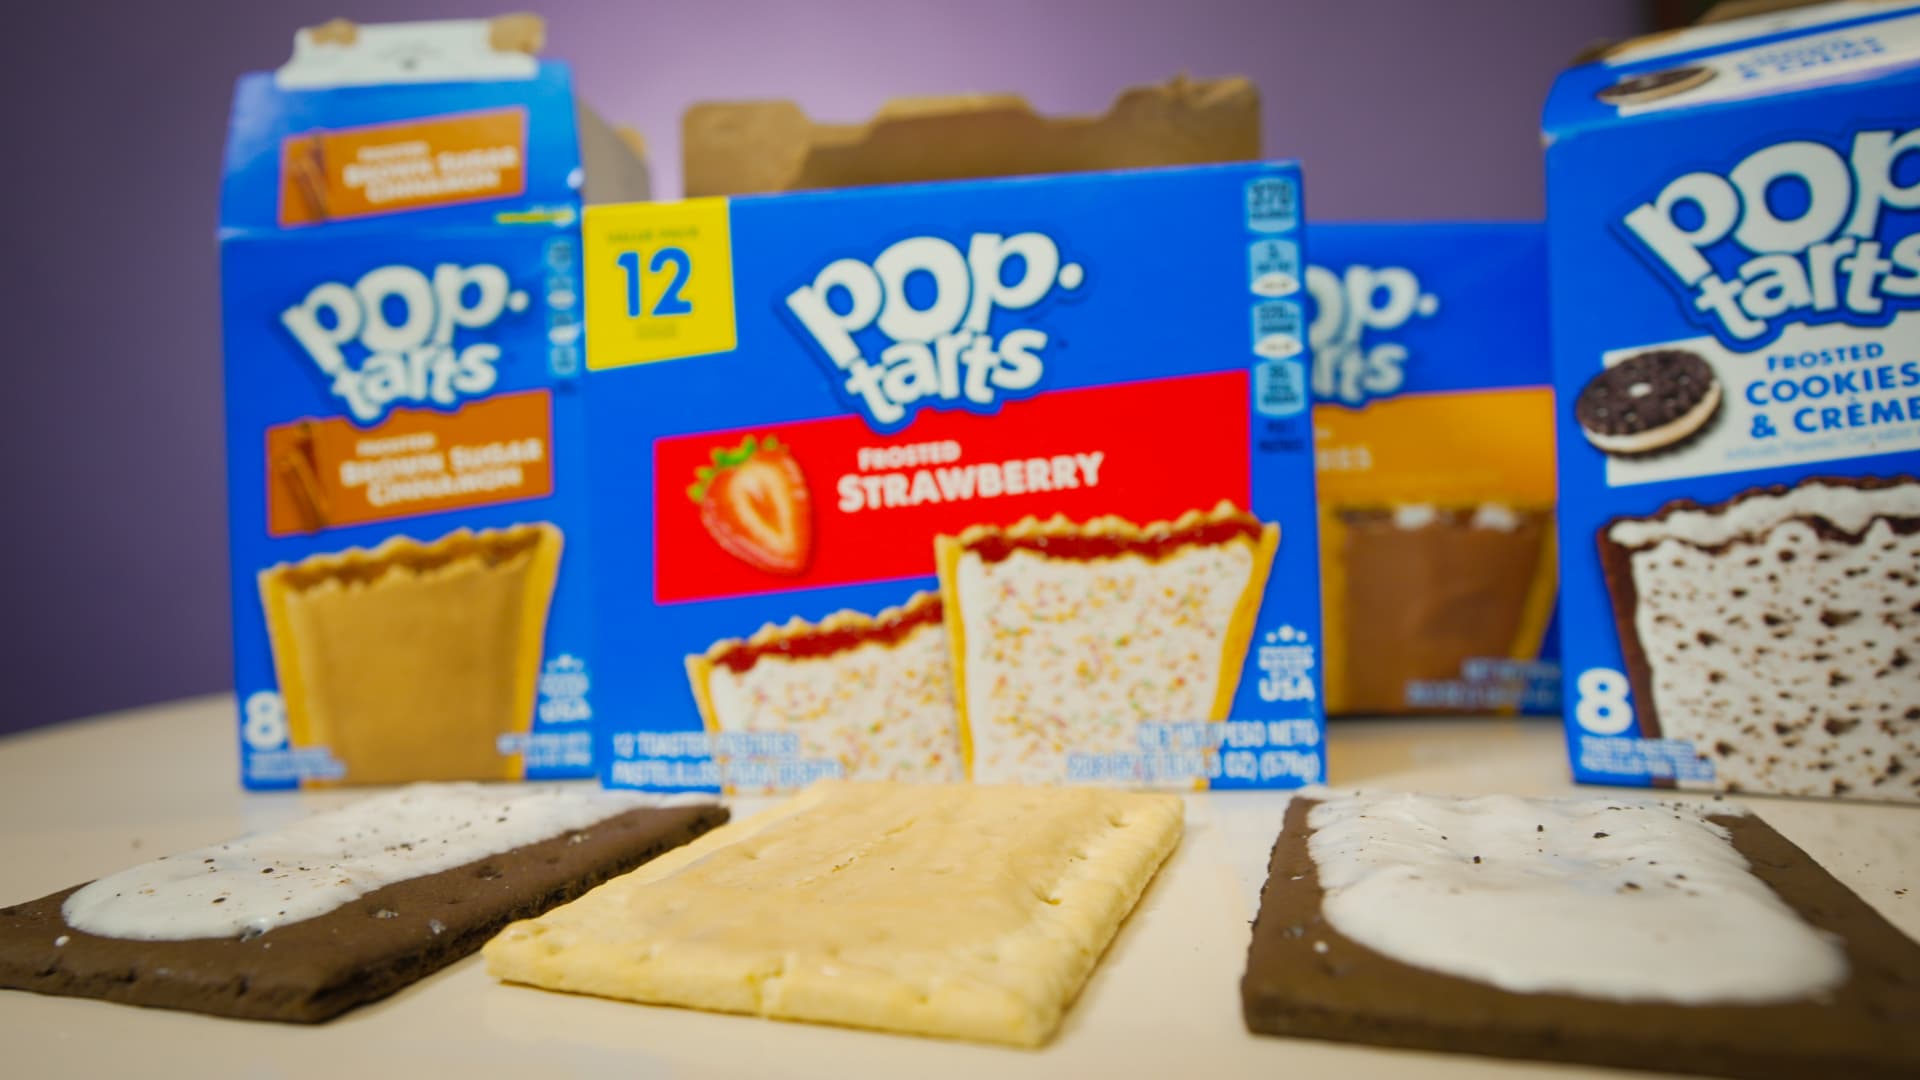 Why Kellanova’s Pop-Tarts gross sales are going solid 60 years later